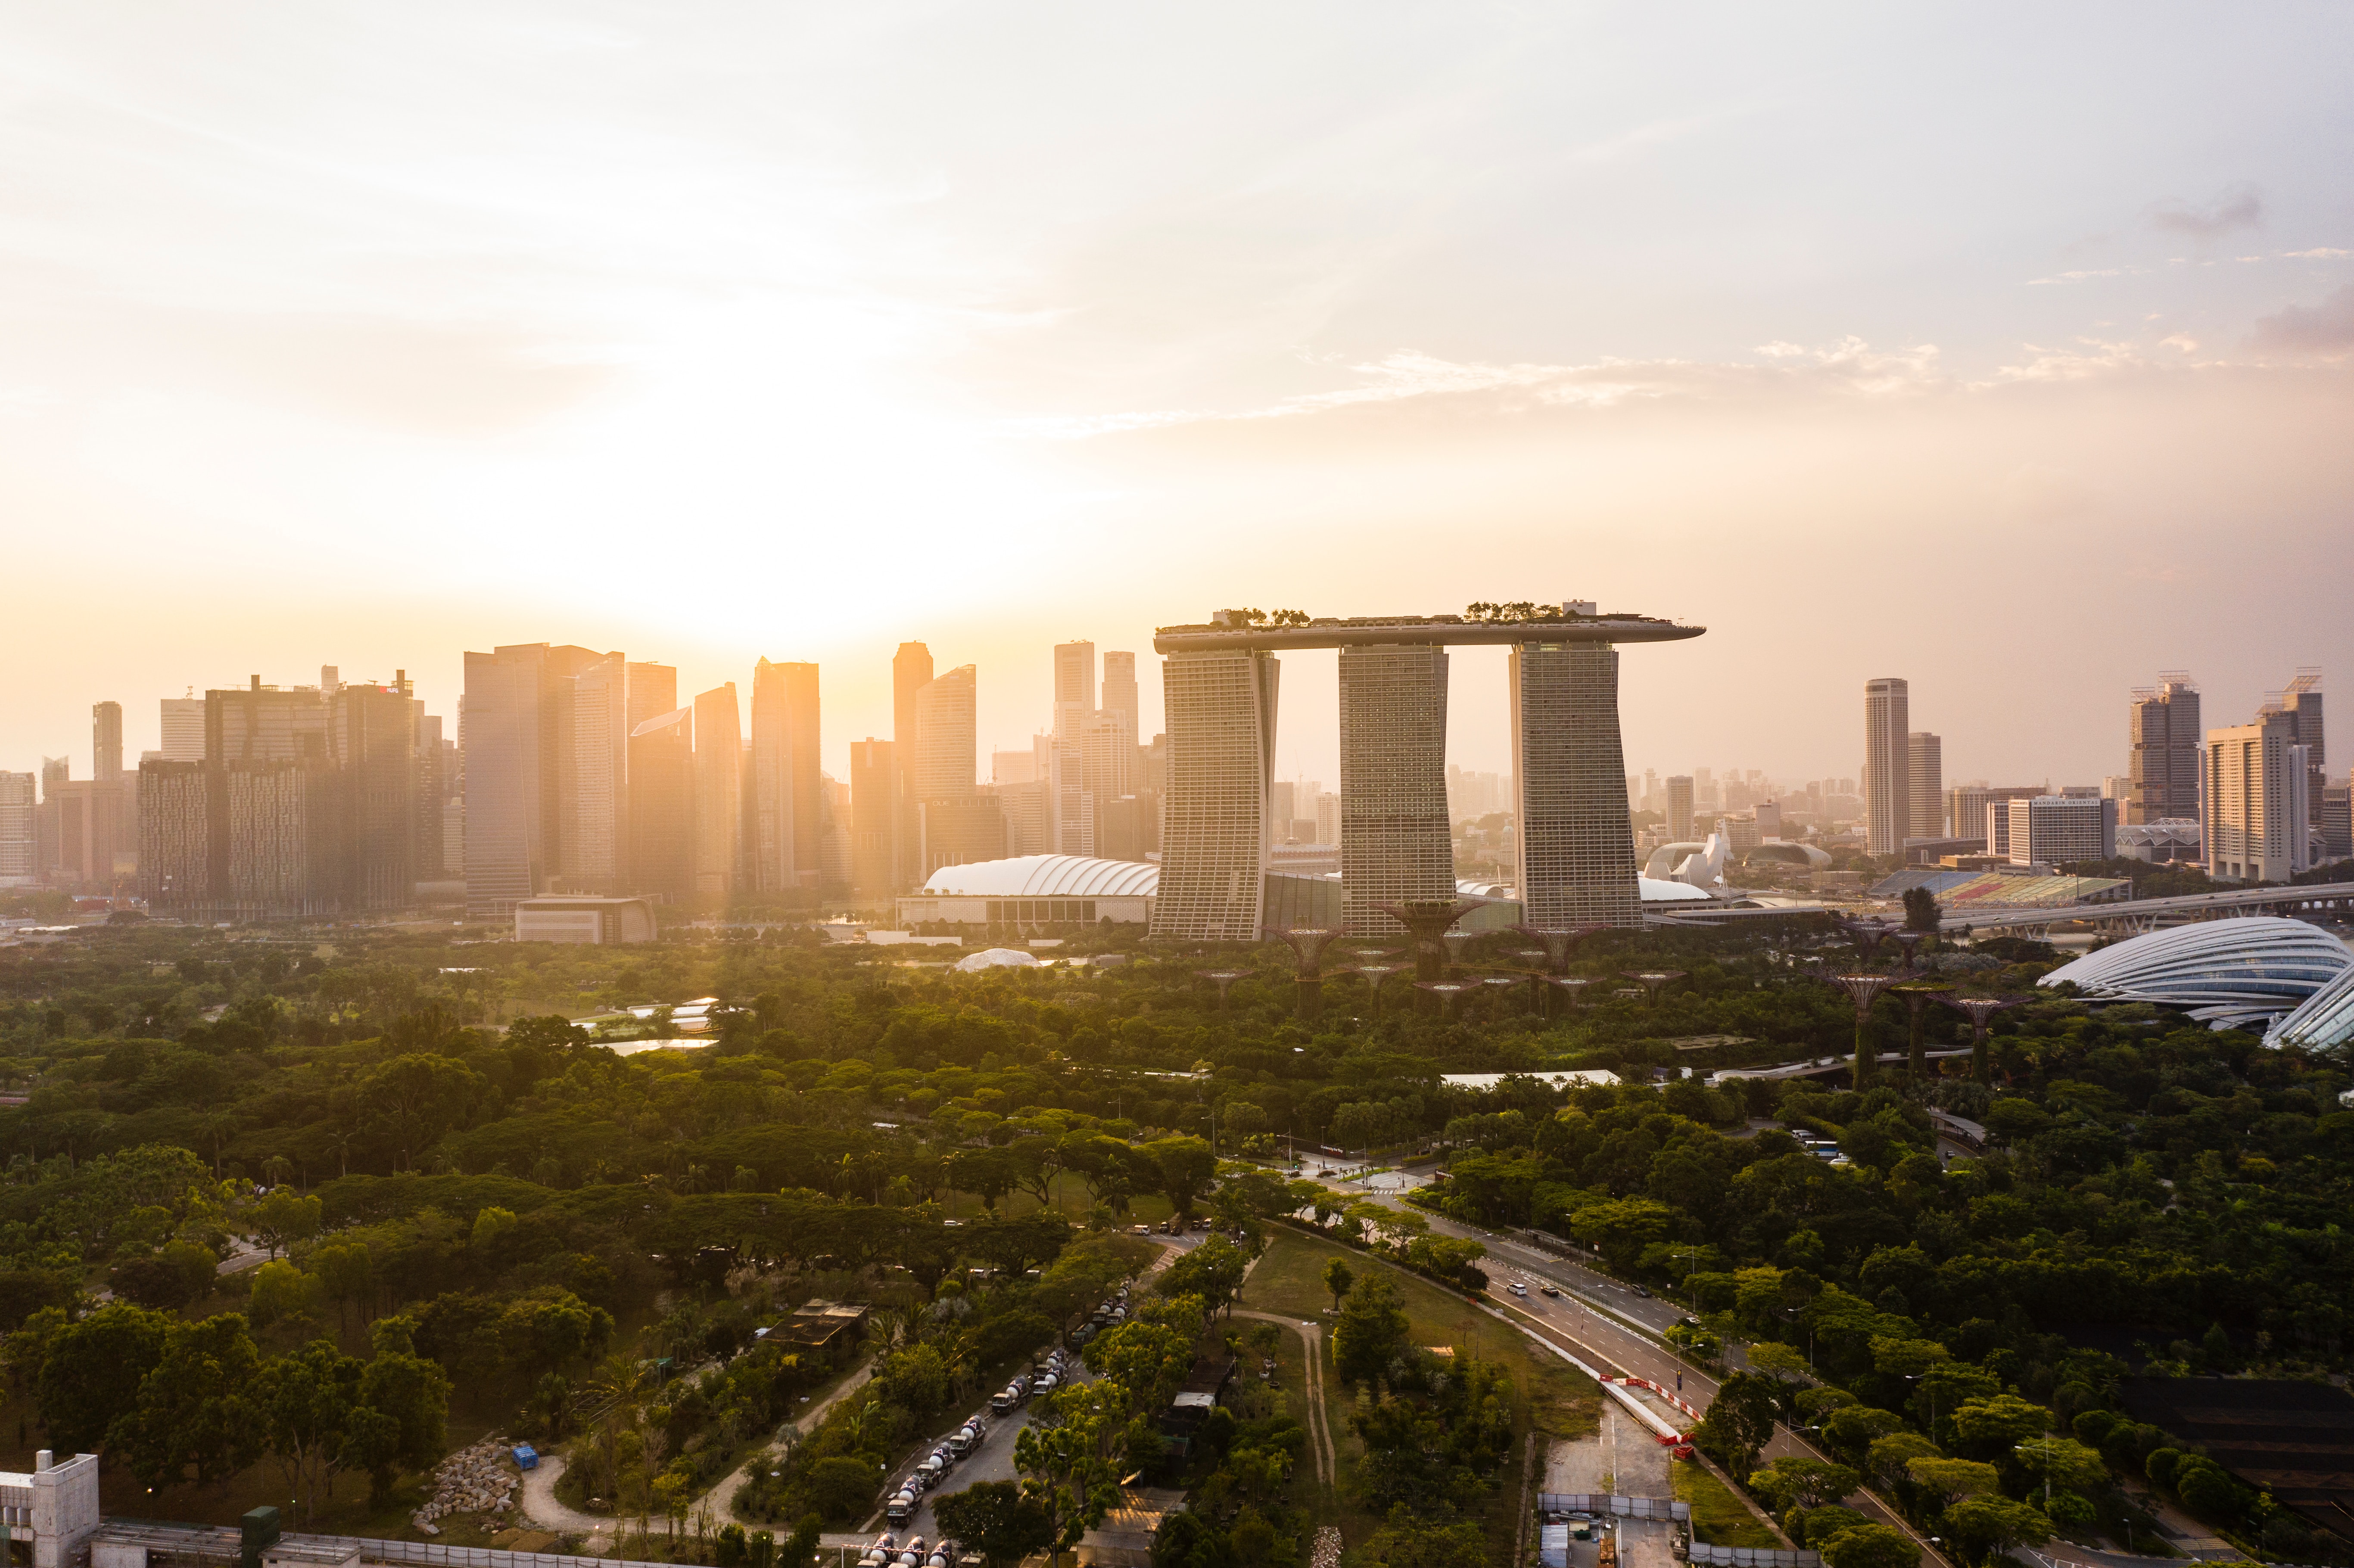 Singapore has distinctive architecture that highlights its green technology